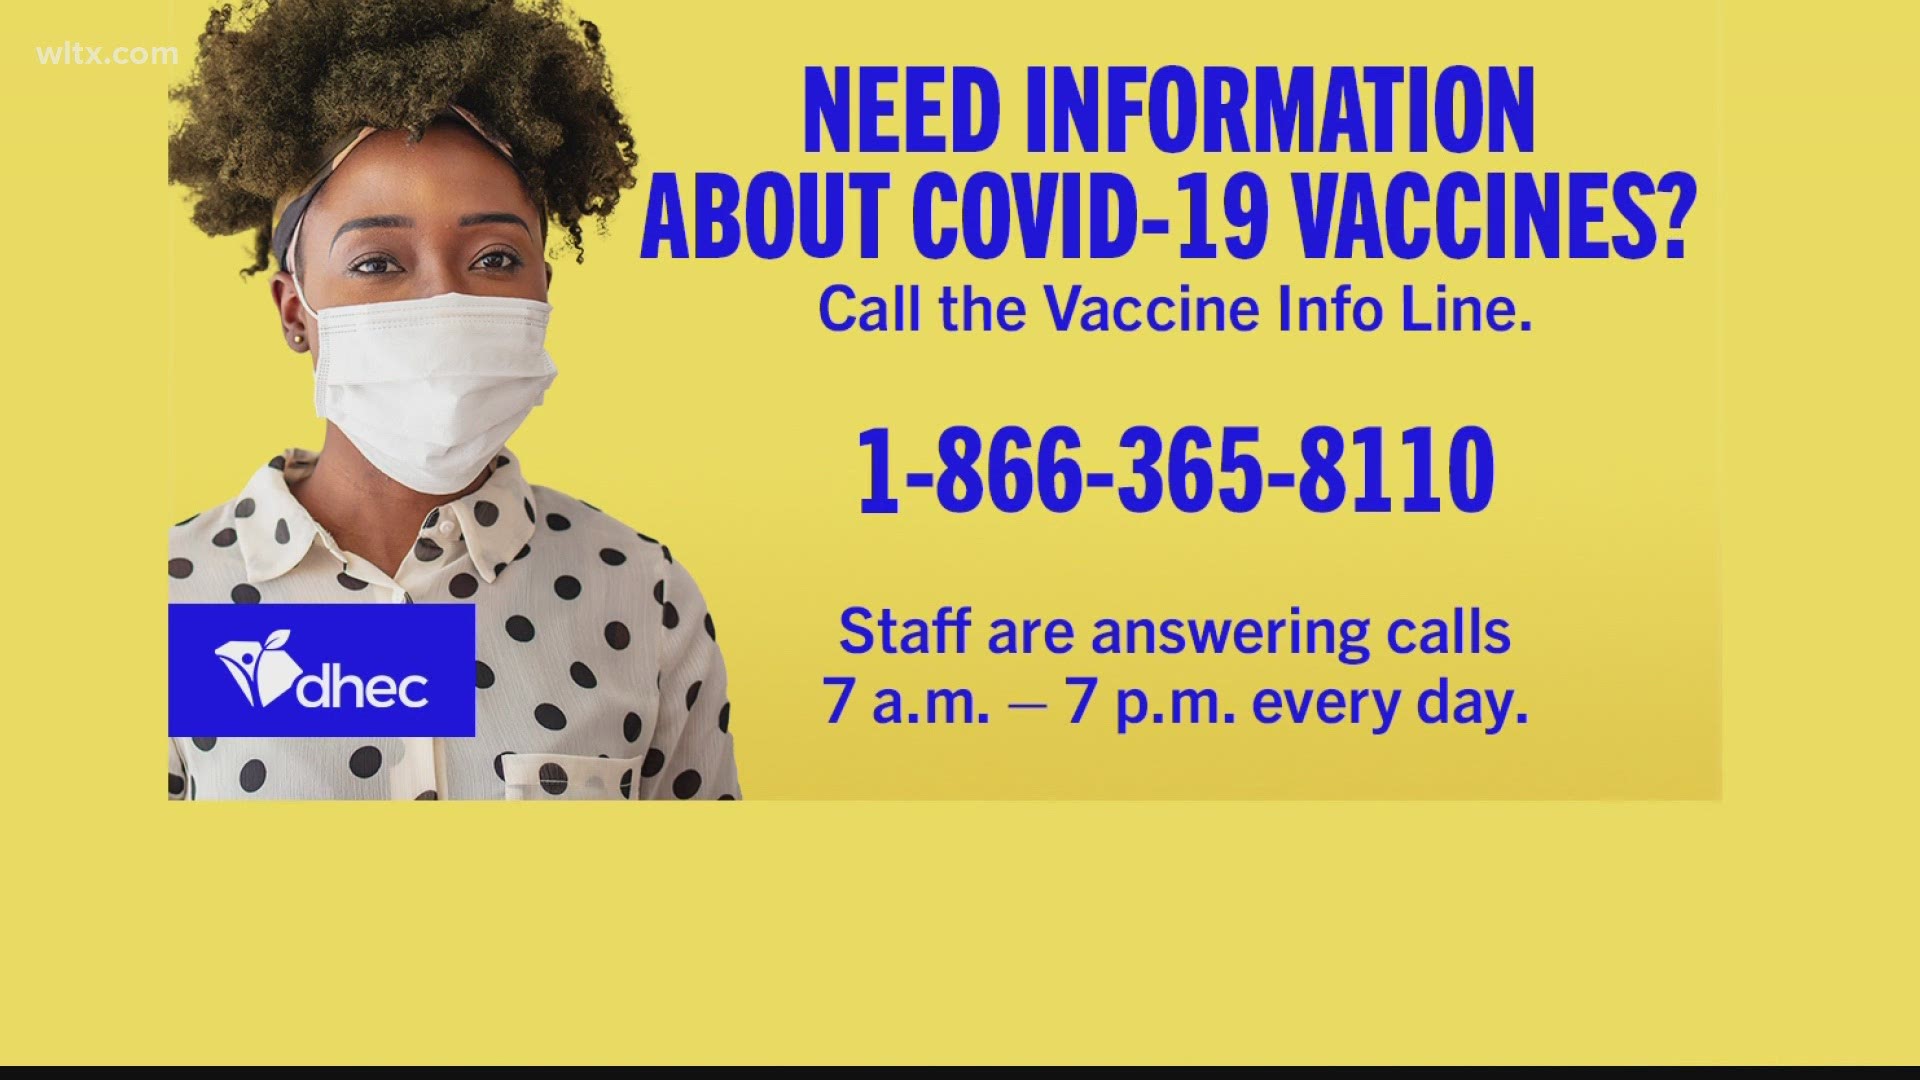 Kayland Hagwood walks you through how to use DHEC's COVID-19 vaccine registration site in South Carolina.